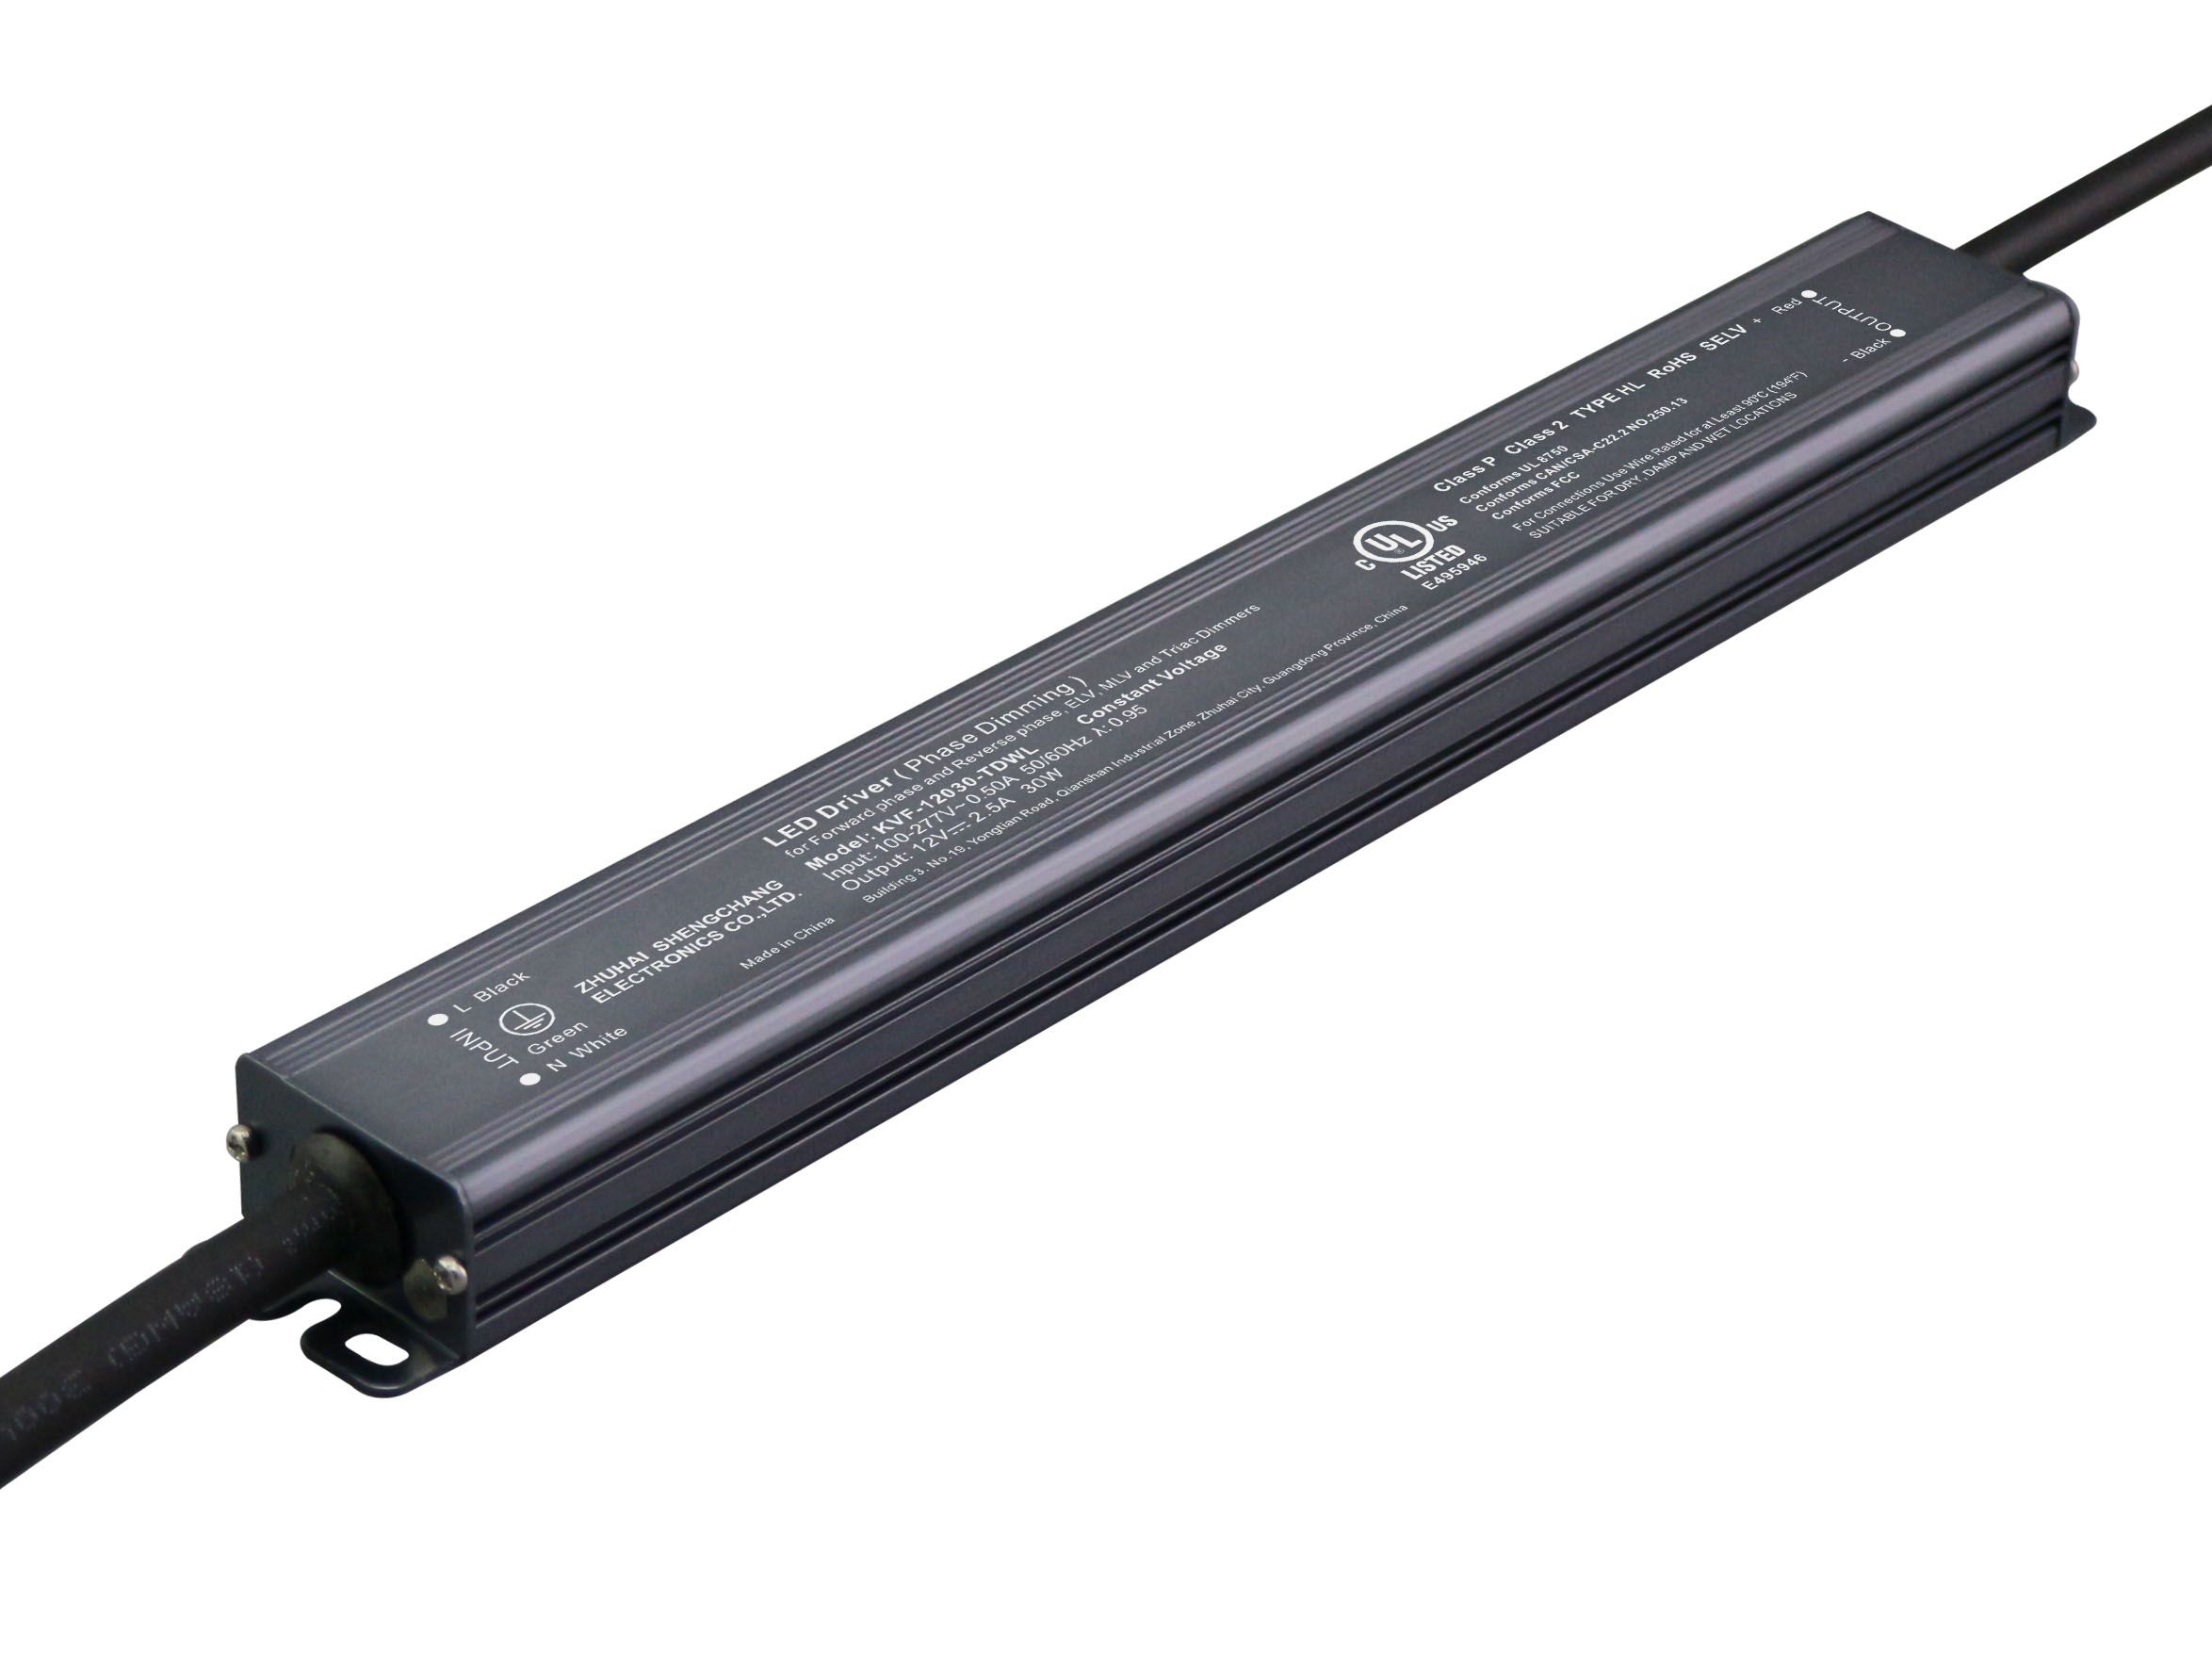 KVF-TDWL Series 30W Constant Voltage Triac Dimmable LED driver